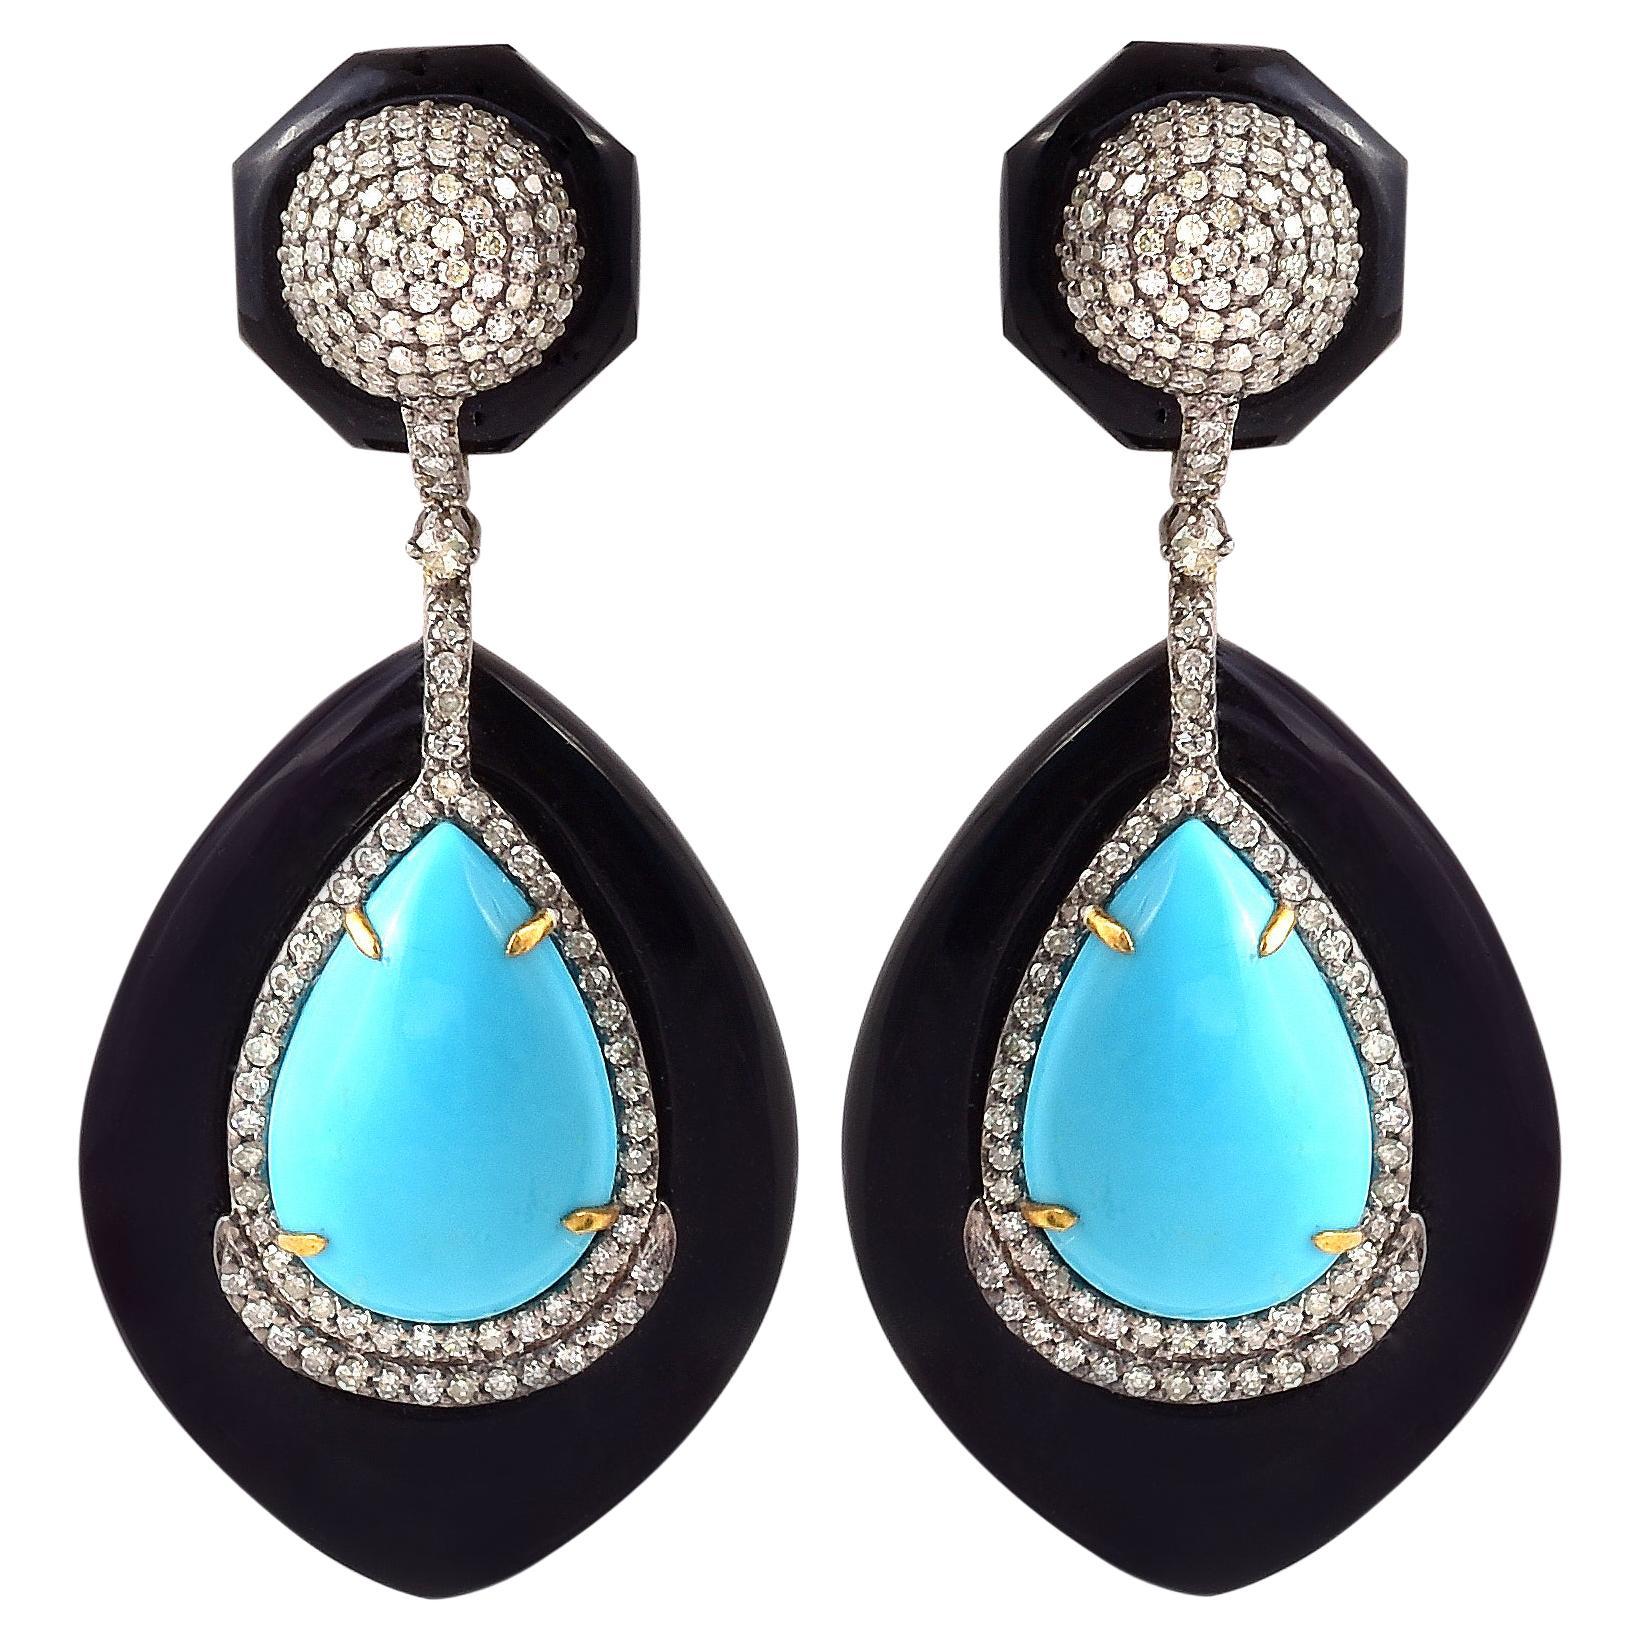 65.08 Carat Turquoise, Black Onyx, and Diamond Earrings in Contemporary Style